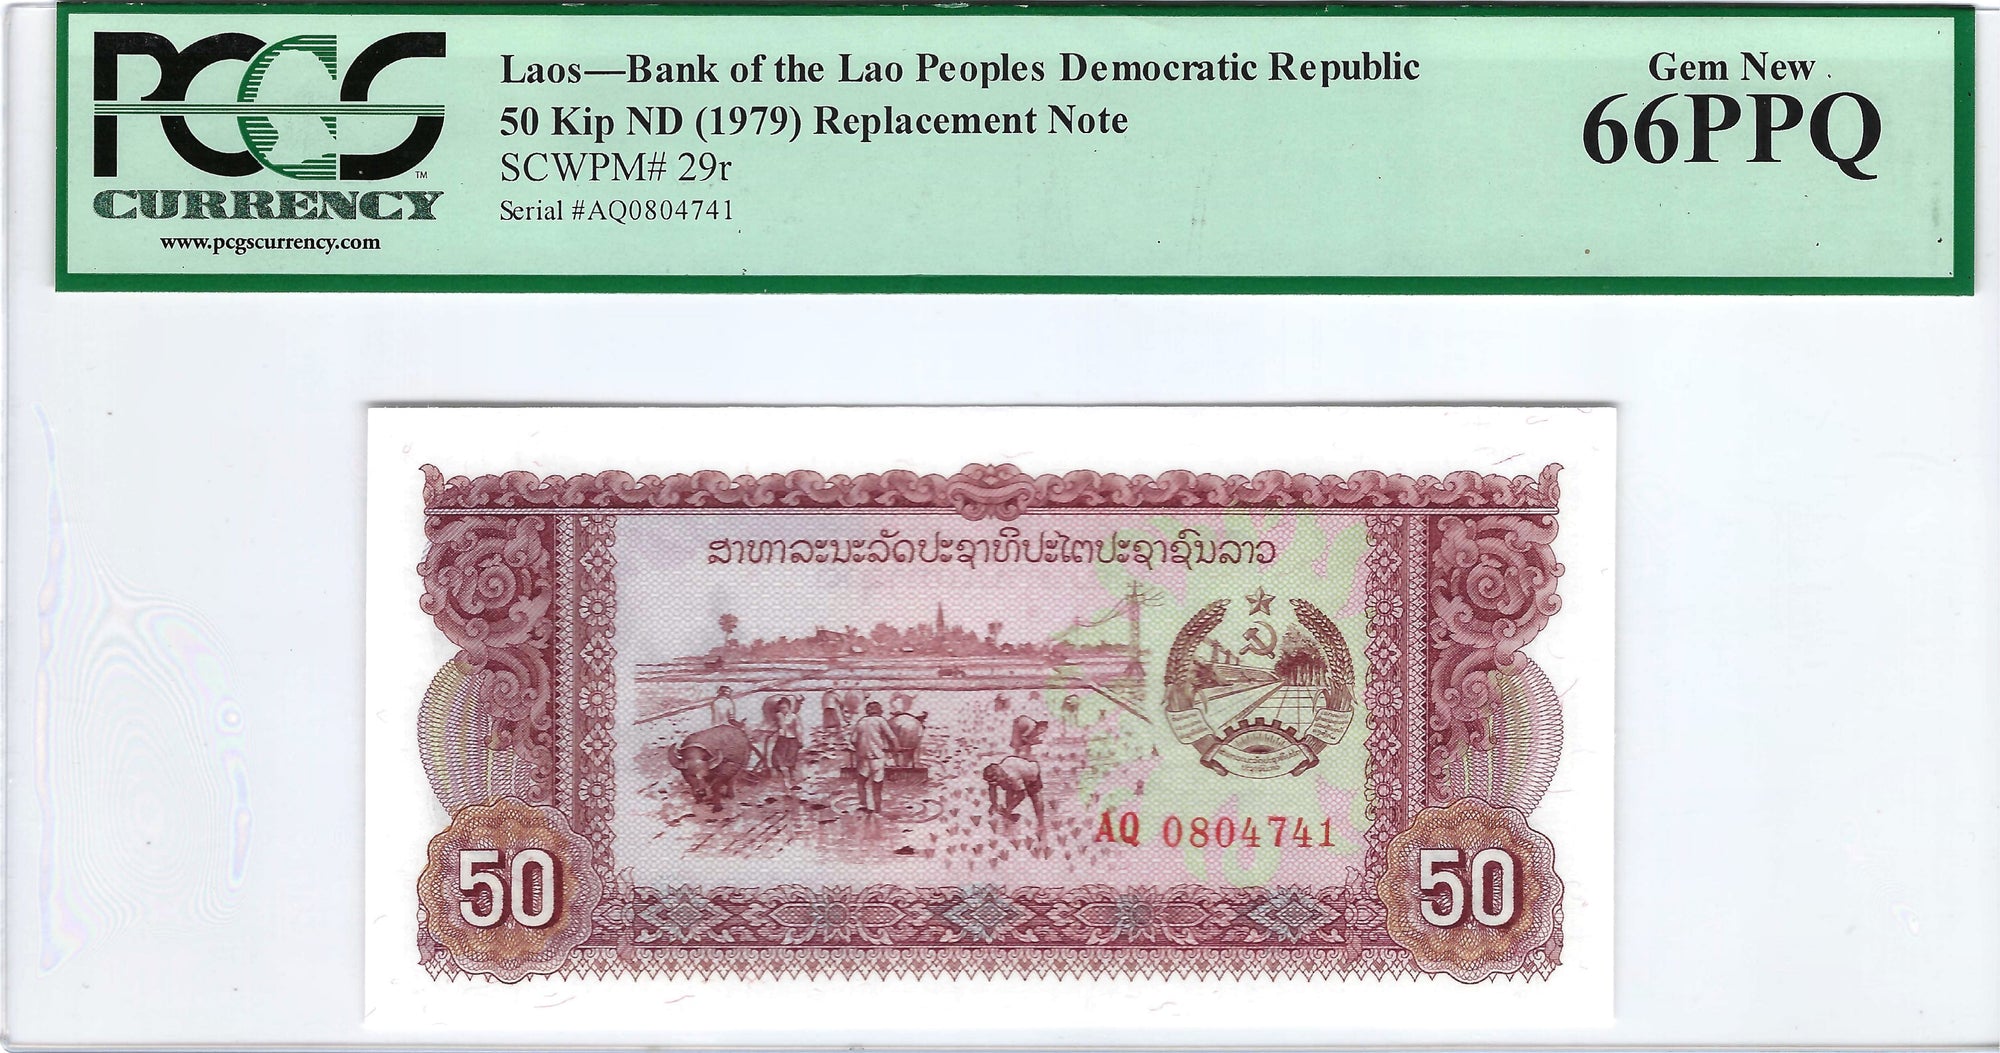 1979 50 Kip ND Replacement Note, Laos, Bank of the Lao Peoples Democratic Republic, PCGS 66PPQ